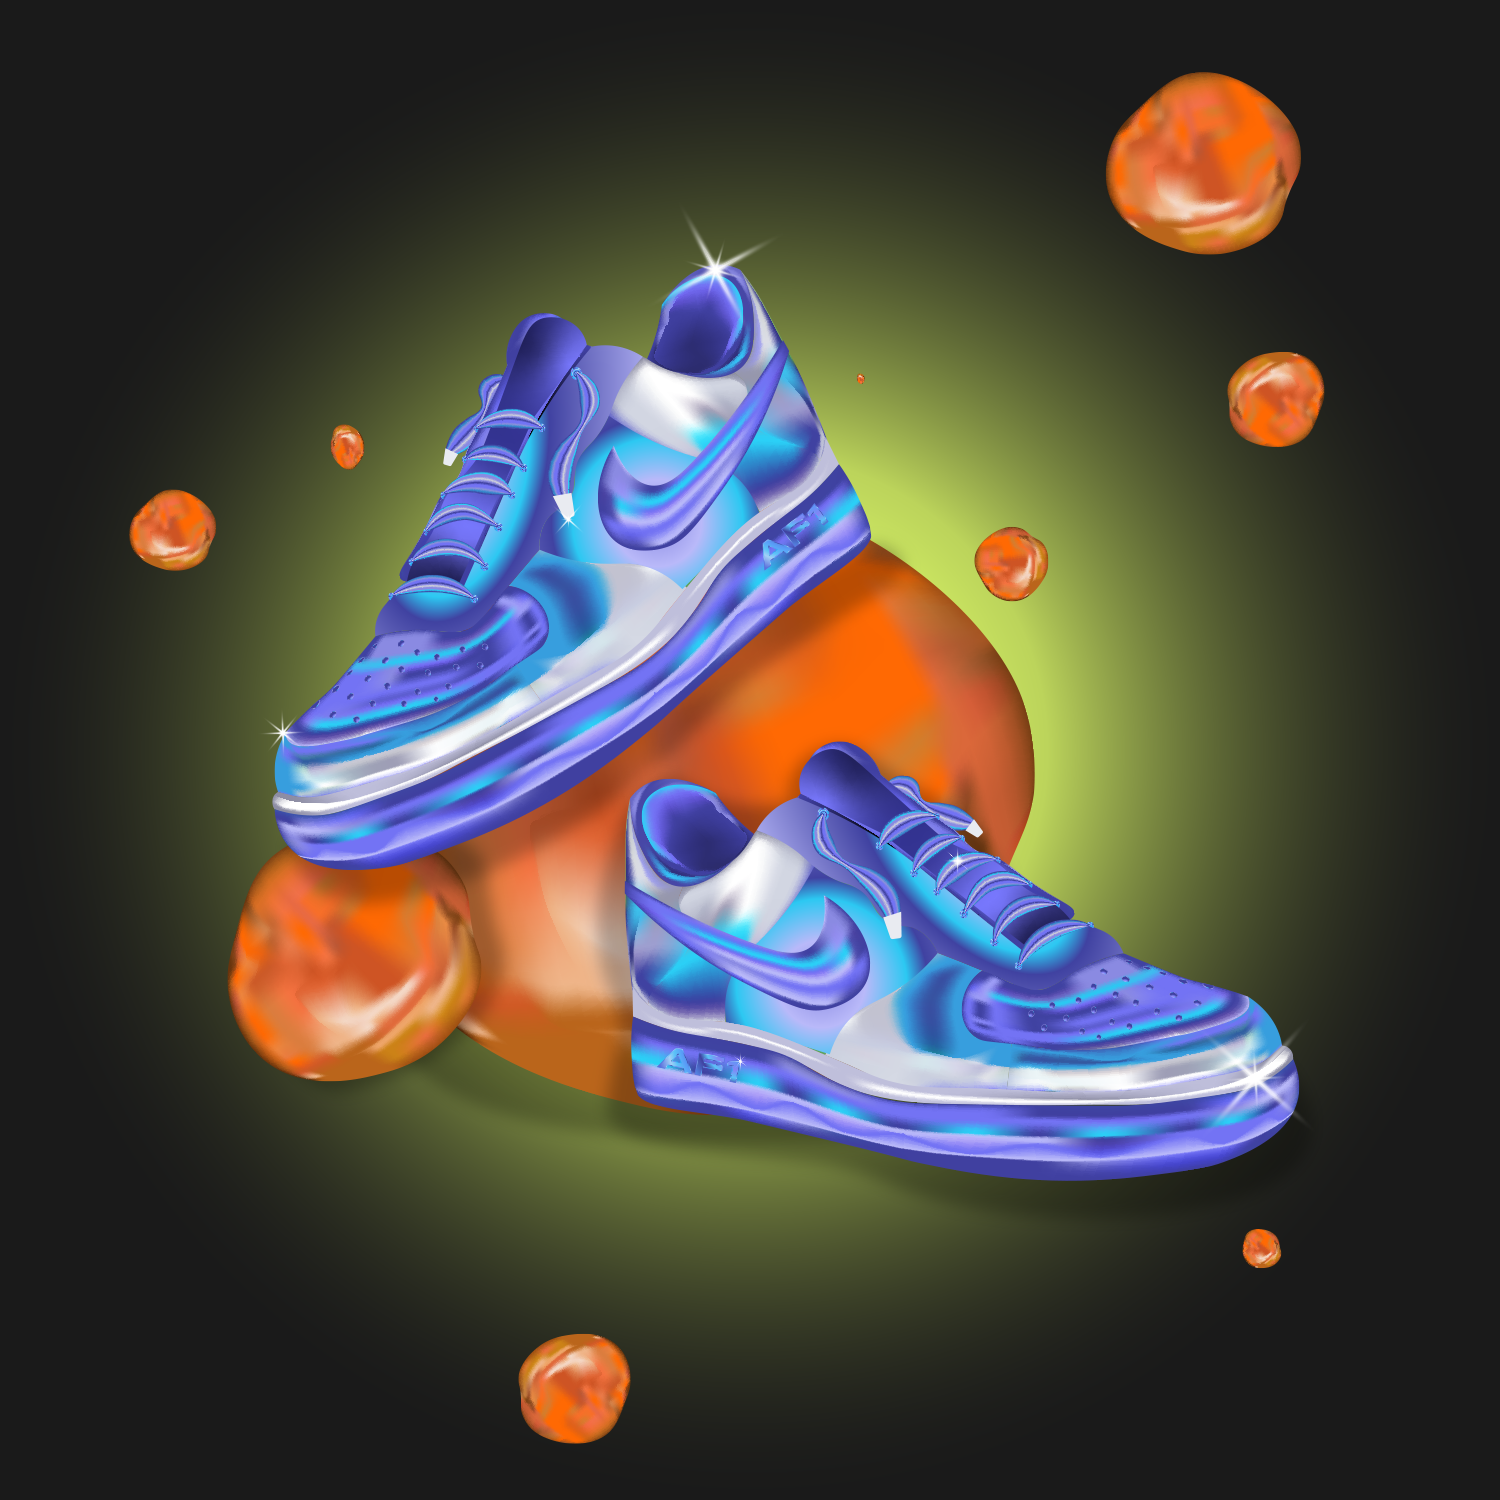 imgurcom  Sneakers illustration Sneakers drawing Shoe design sketches